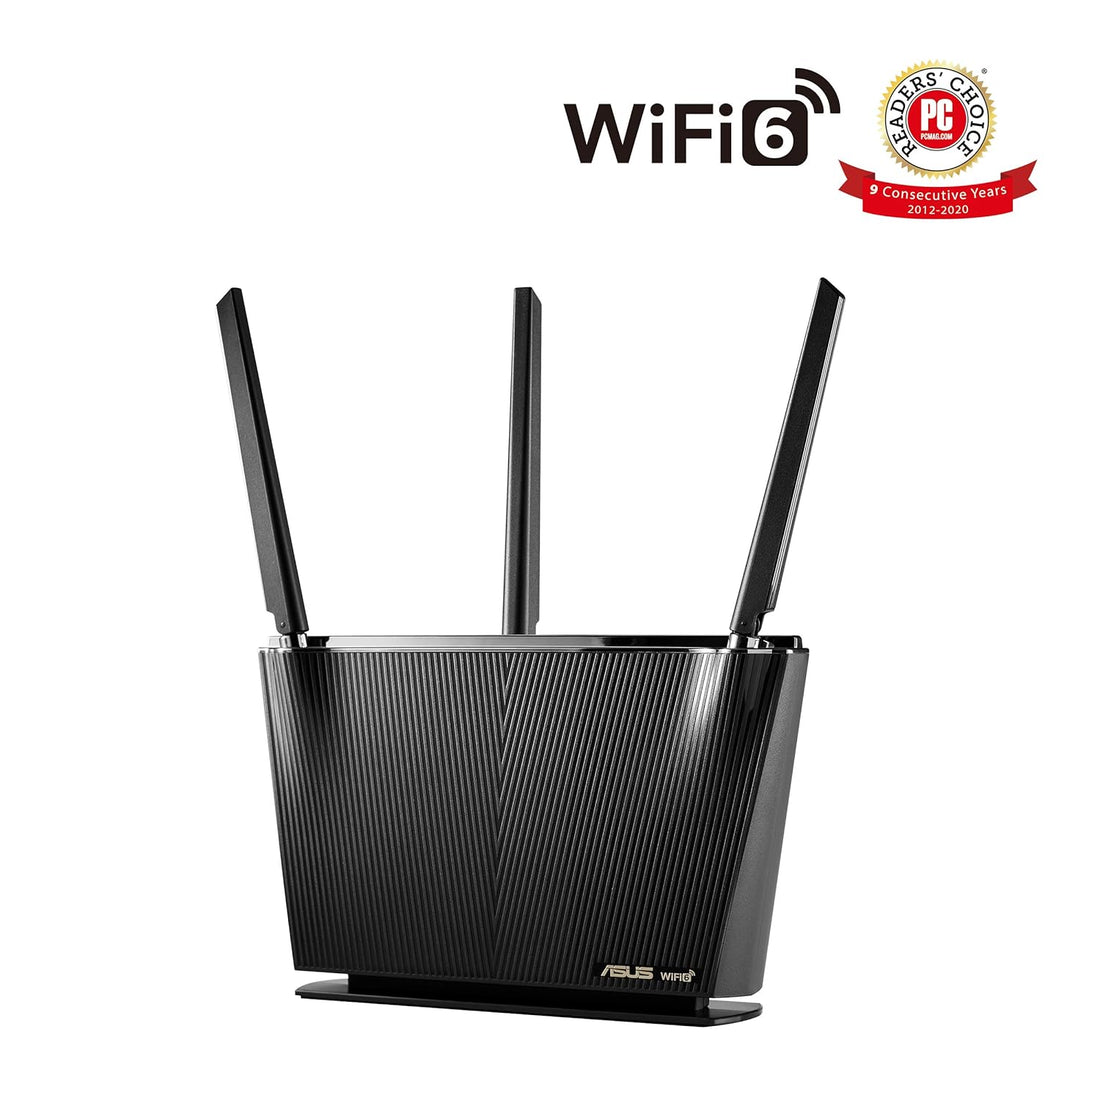 ASUS WiFi 6 Router (RT-AX68U) - Dual Band Gigabit Wireless Router, 3x3 Support, Gaming & Streaming, AiMesh Compatible, Included Lifetime Internet Security, Parental Control, MU-MIMO, OFDMA